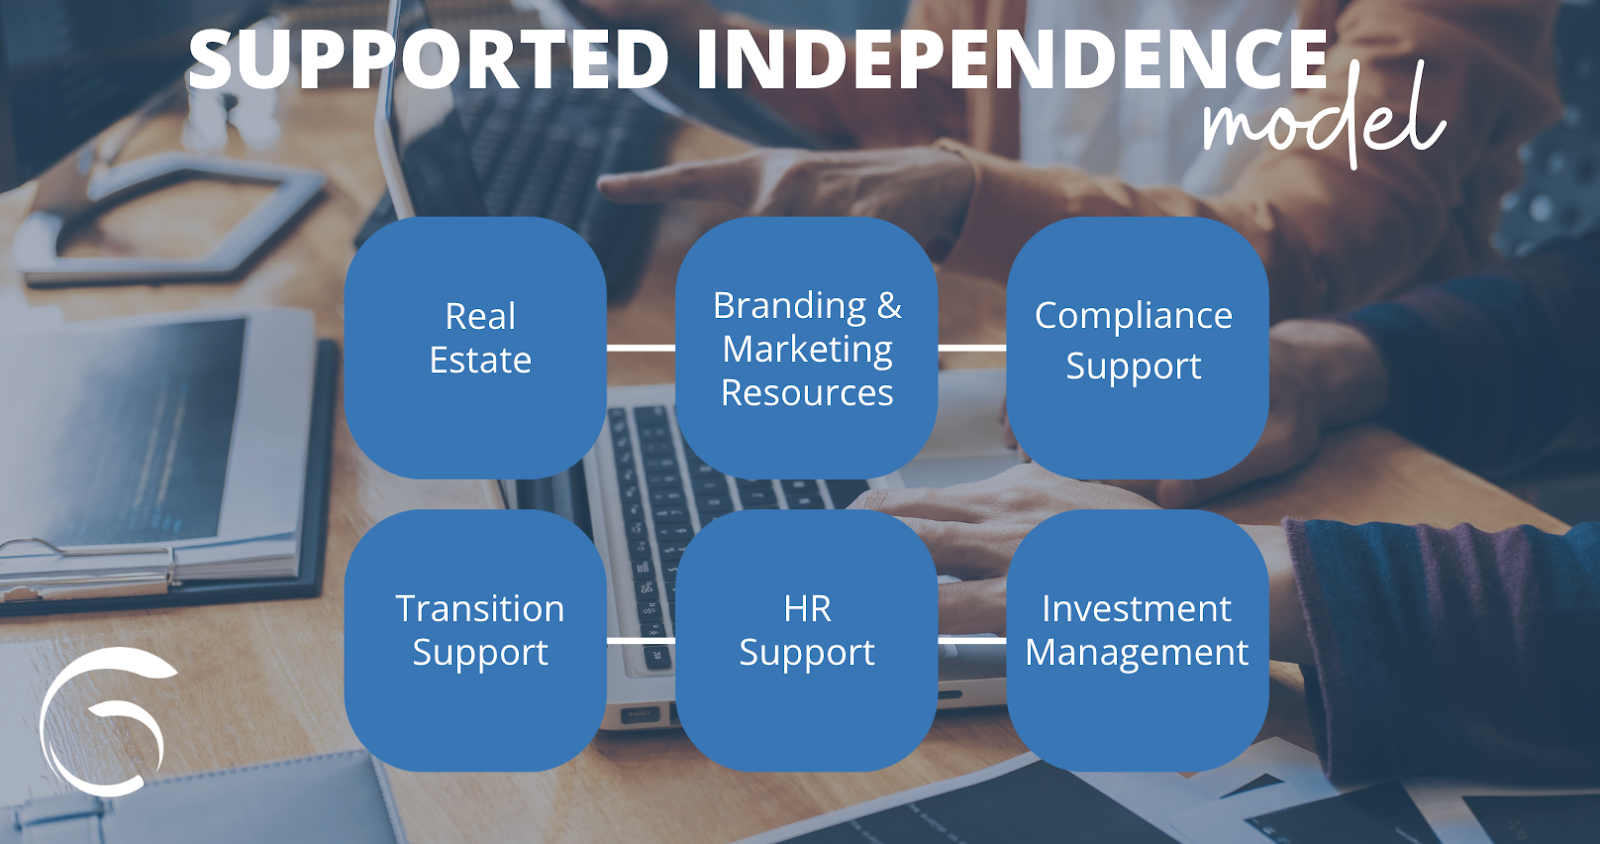 The supported independence model is outlined